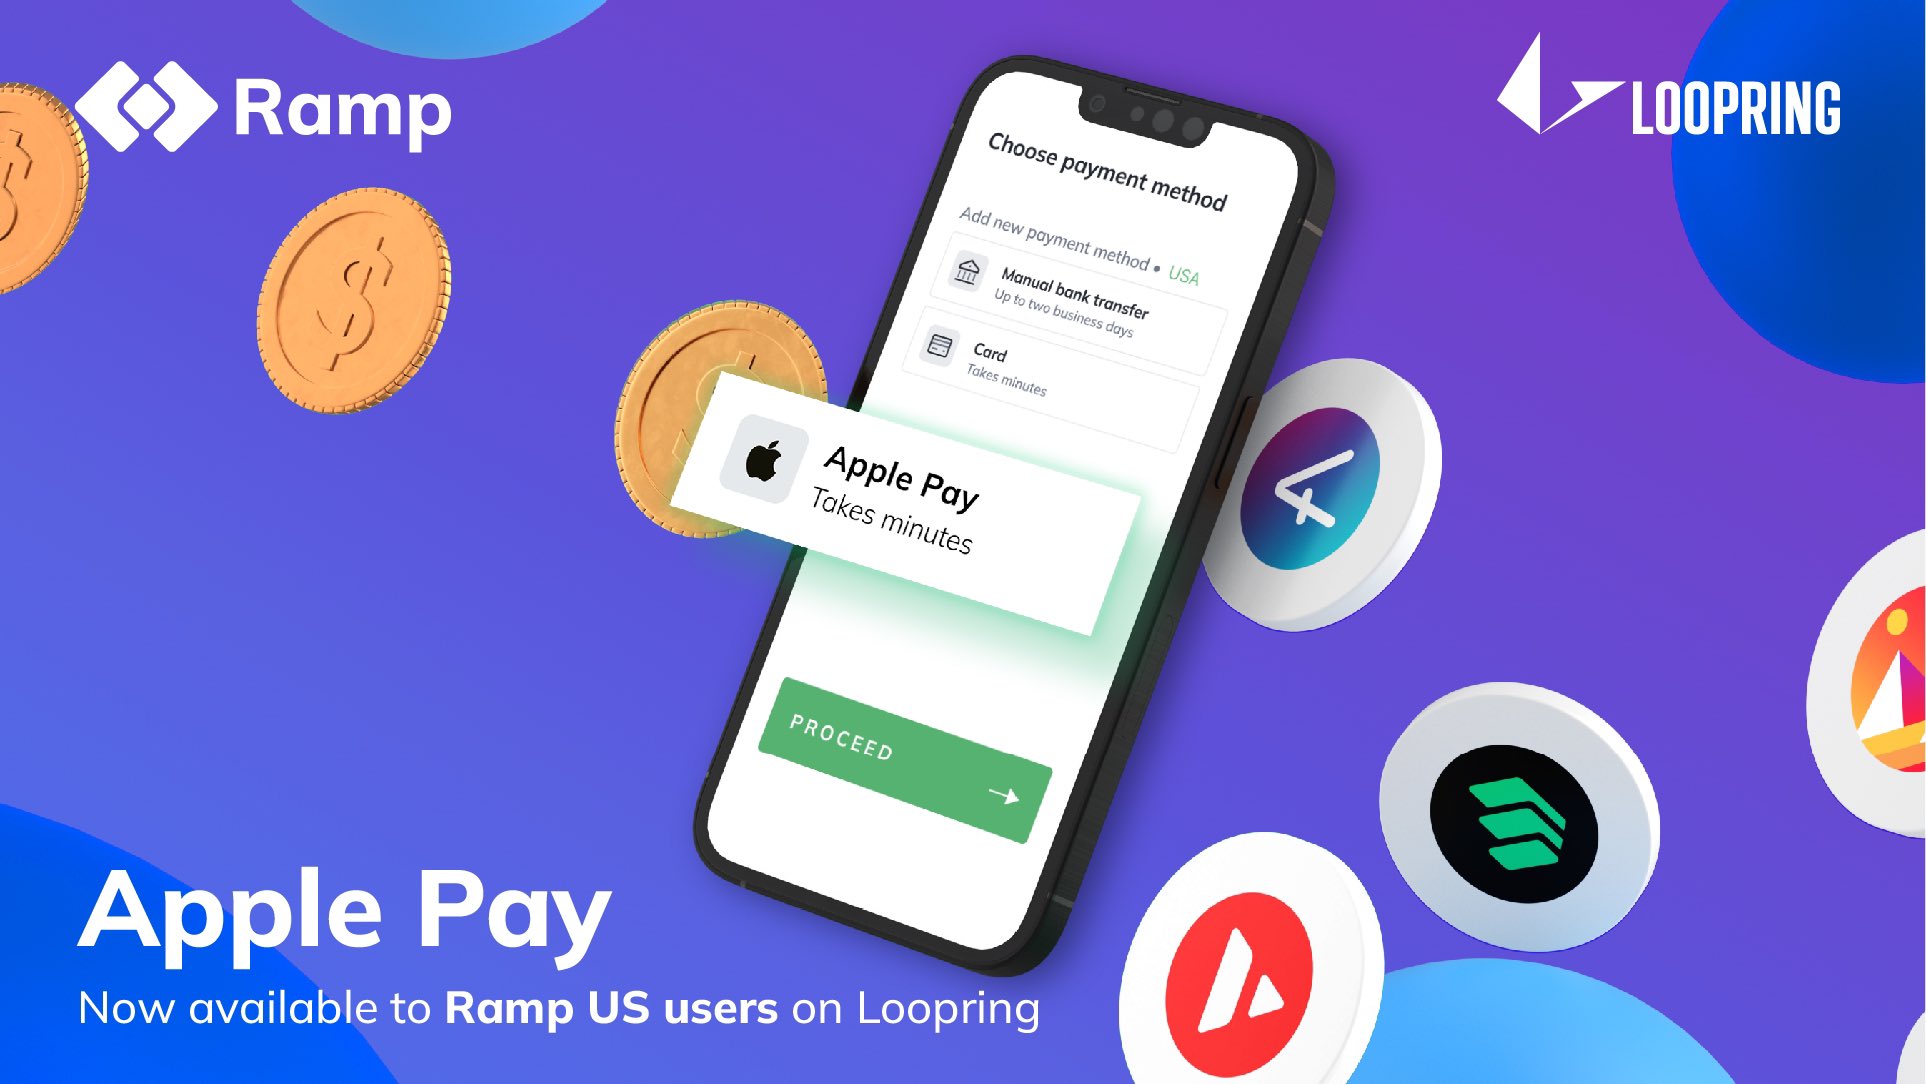 How to buy Elo Boost with Apple Pay or Google Pay - Eloking